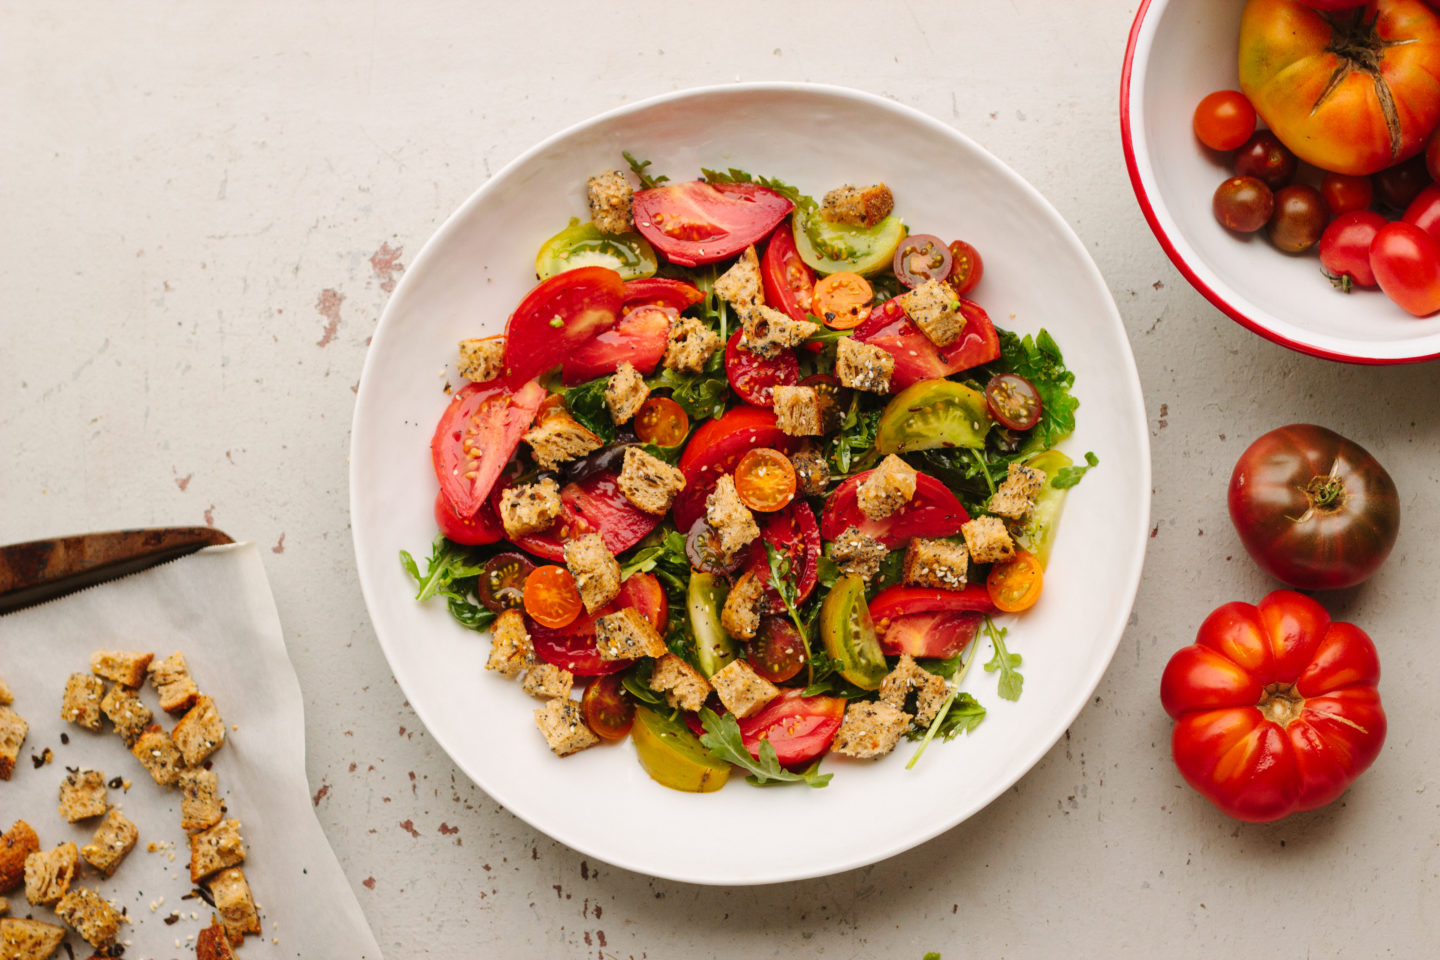 tomato salad with everything bagel spiced croutons – Michelle Arbus